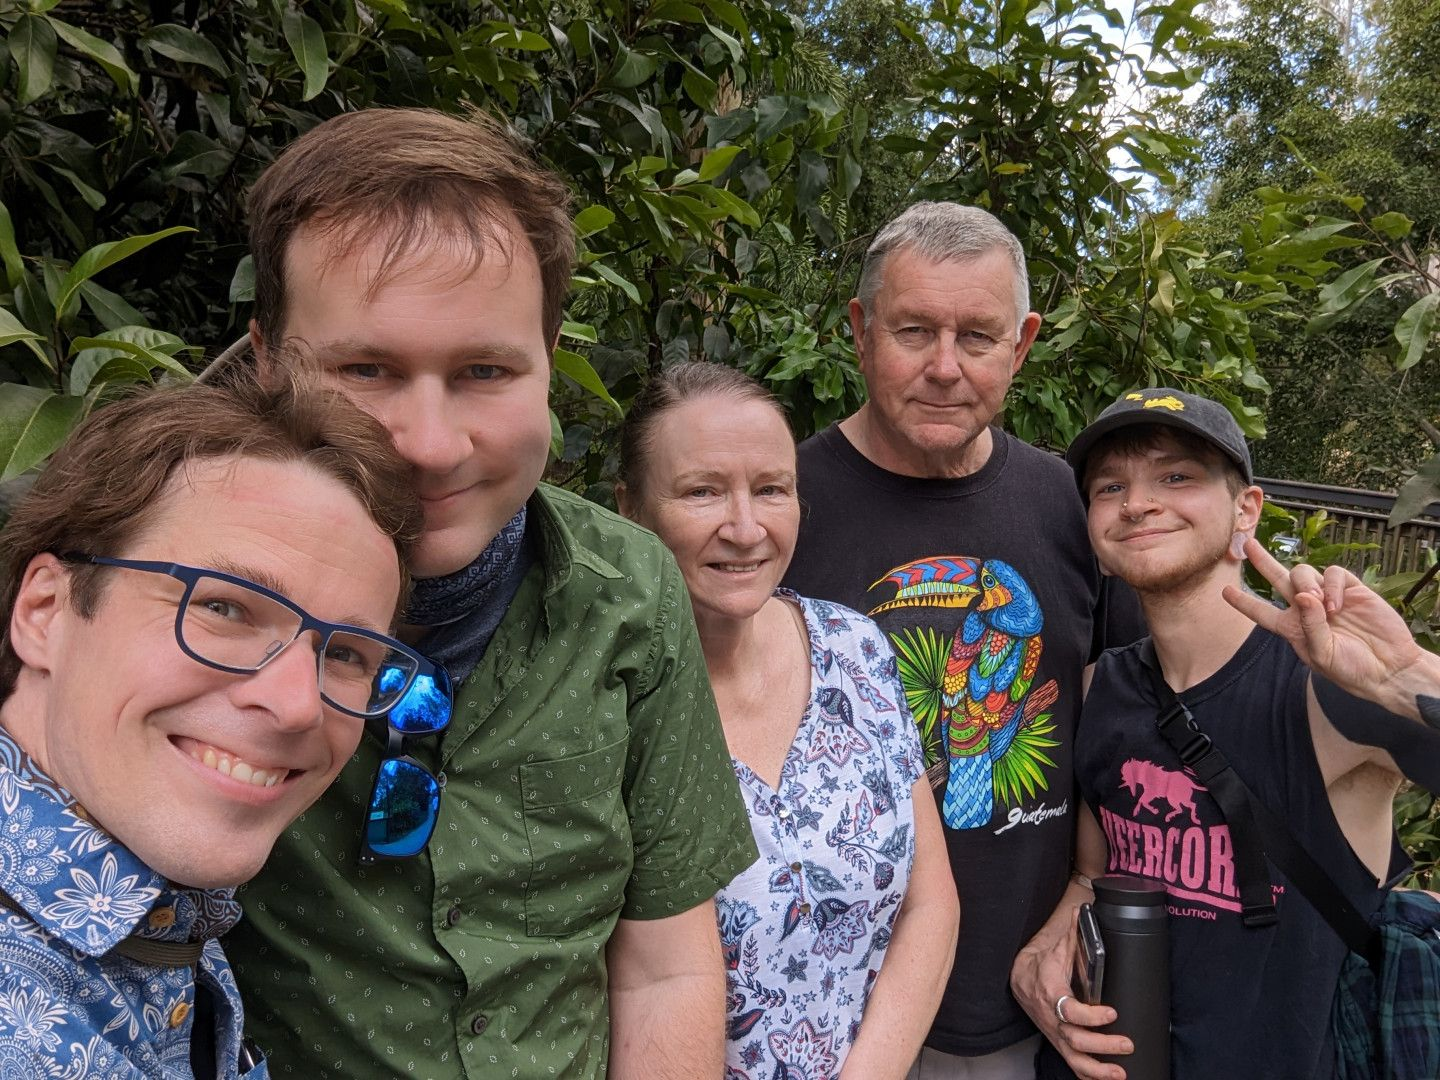 A photo of the whole Aussie family that Josh married into, from left to right: Josh, Chris, Michelle, Rolf, and Rory. Everyone is smiling, to some degree, and Rory is throwing a peace town. Behind them is a stand of verdant subtropical plants